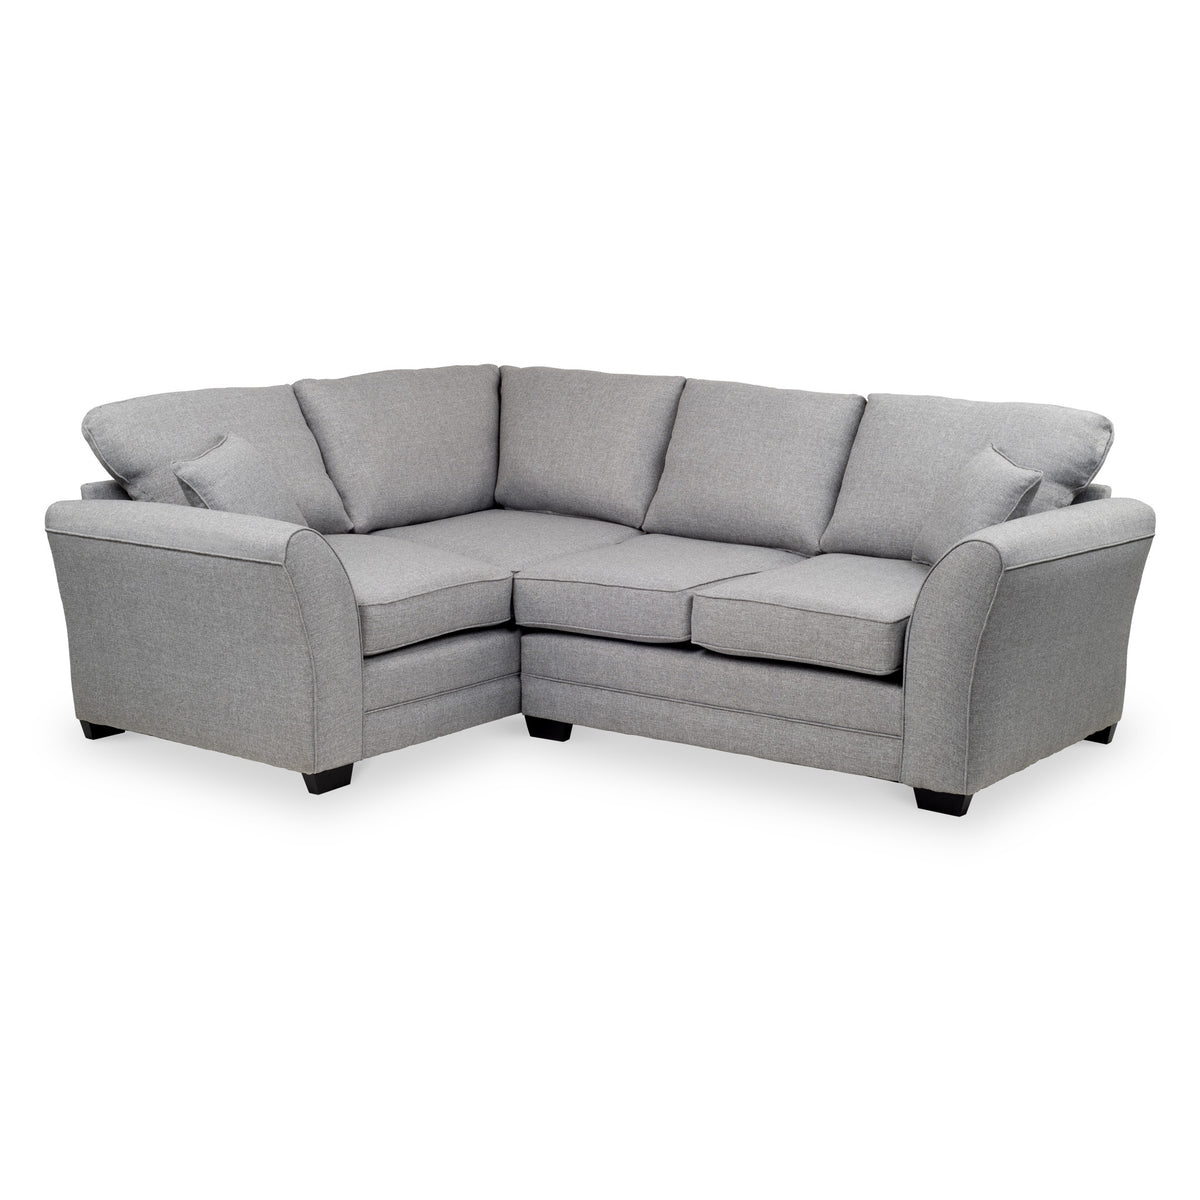 St Ives Corner Sofa in Silver by Roseland Furniture